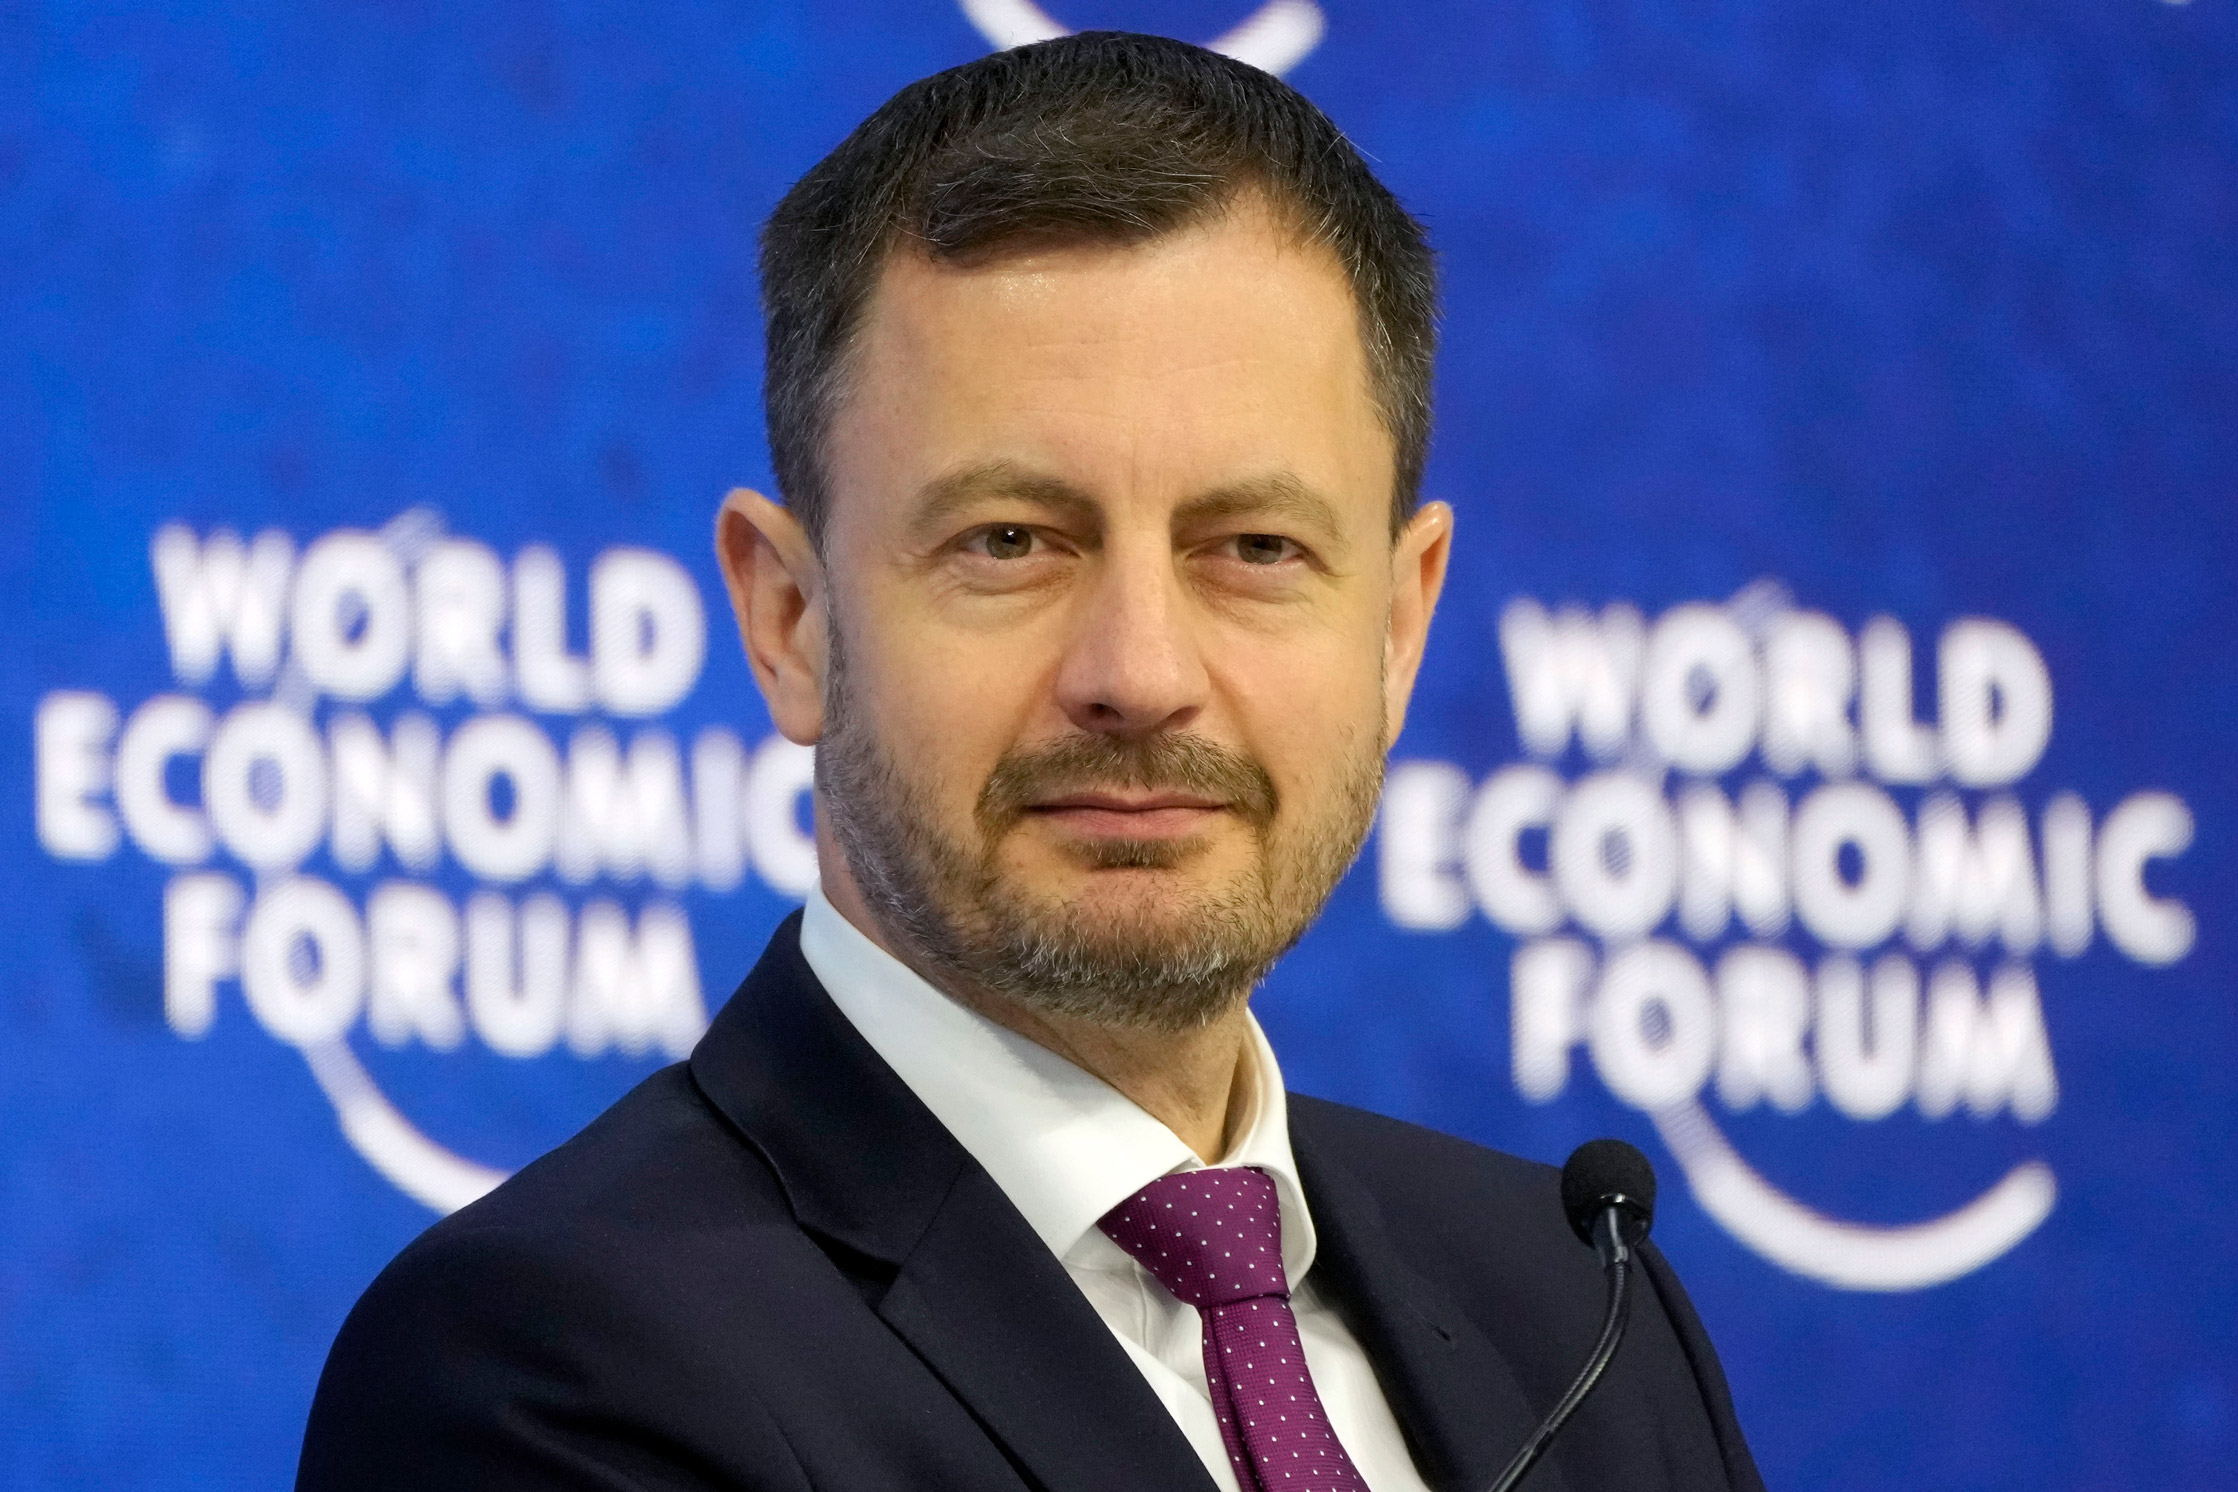 Eduard Heger, Prime Minister of the Slovak Republic, attends a panel session at the World Economic Forum in Davos, Switzerland, Wednesday.